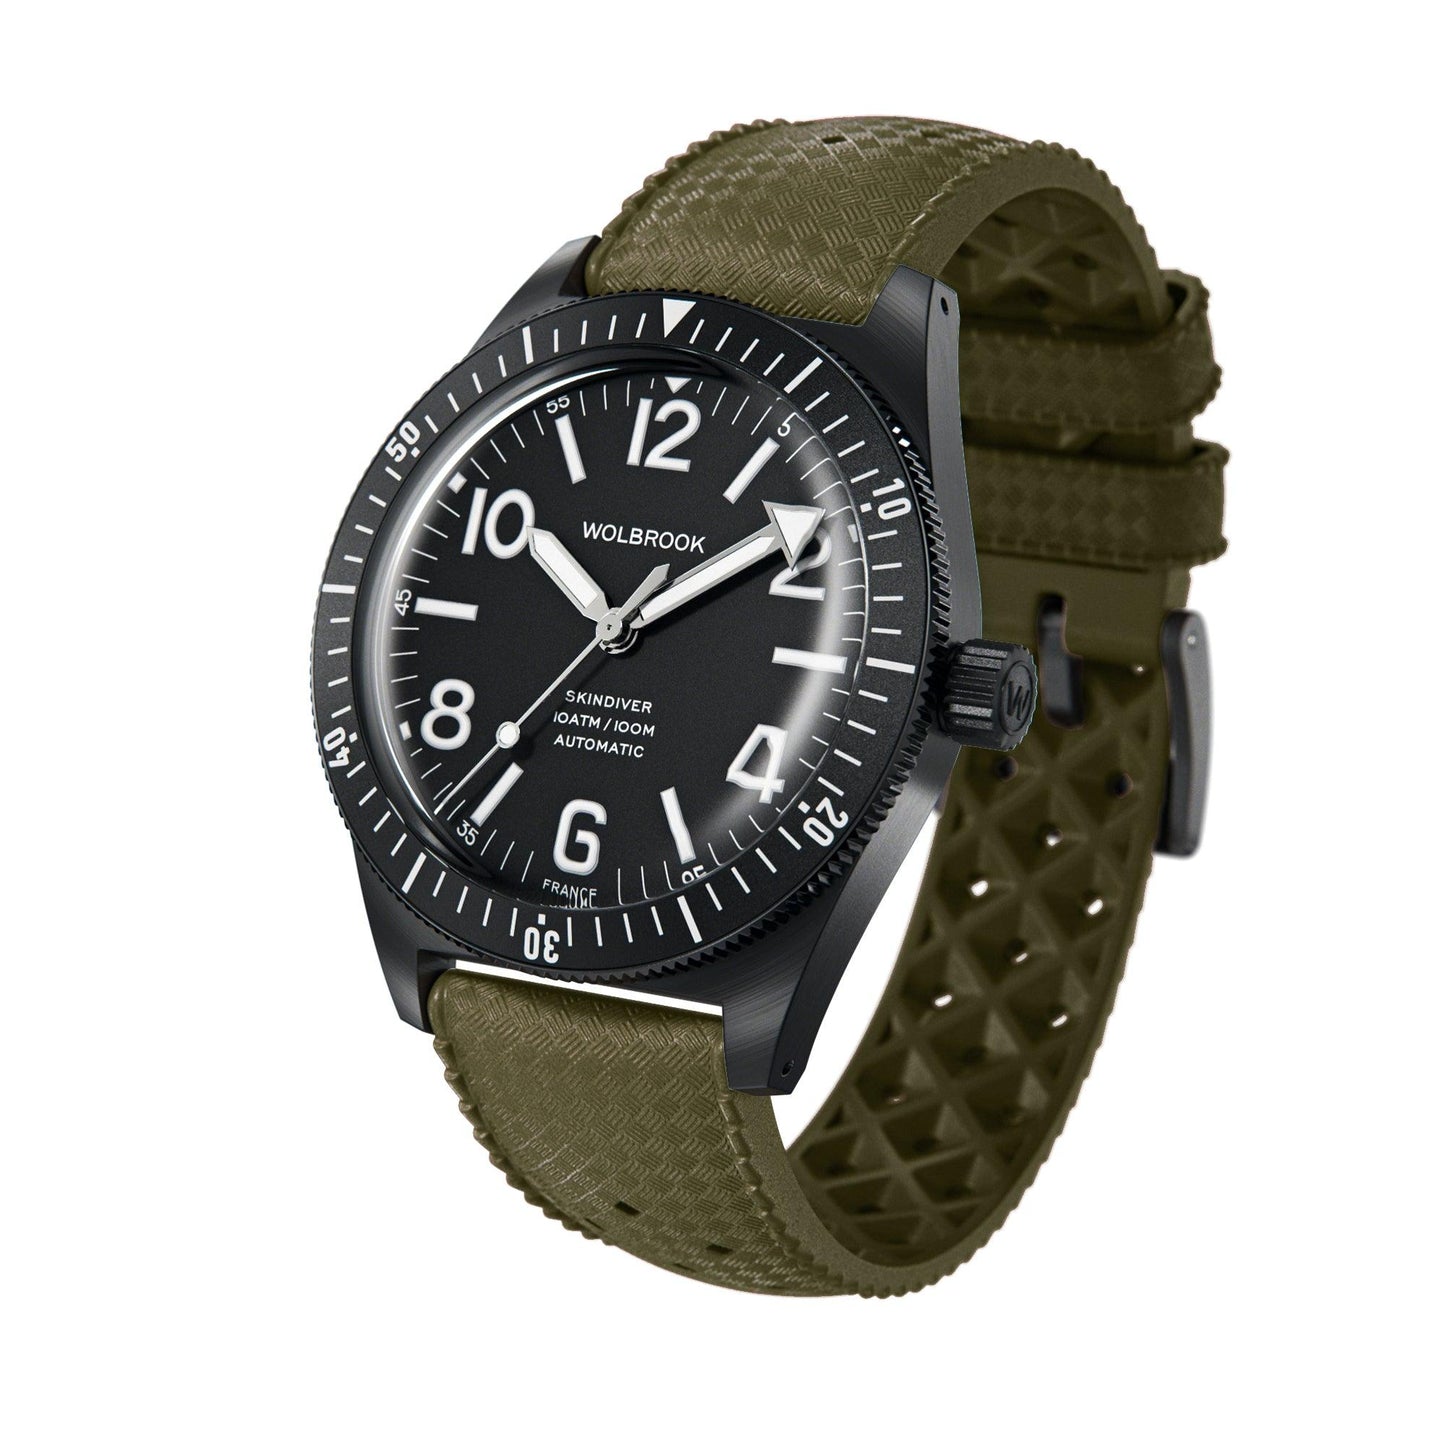 Skindiver Automatic Watch - Black PVD - 21